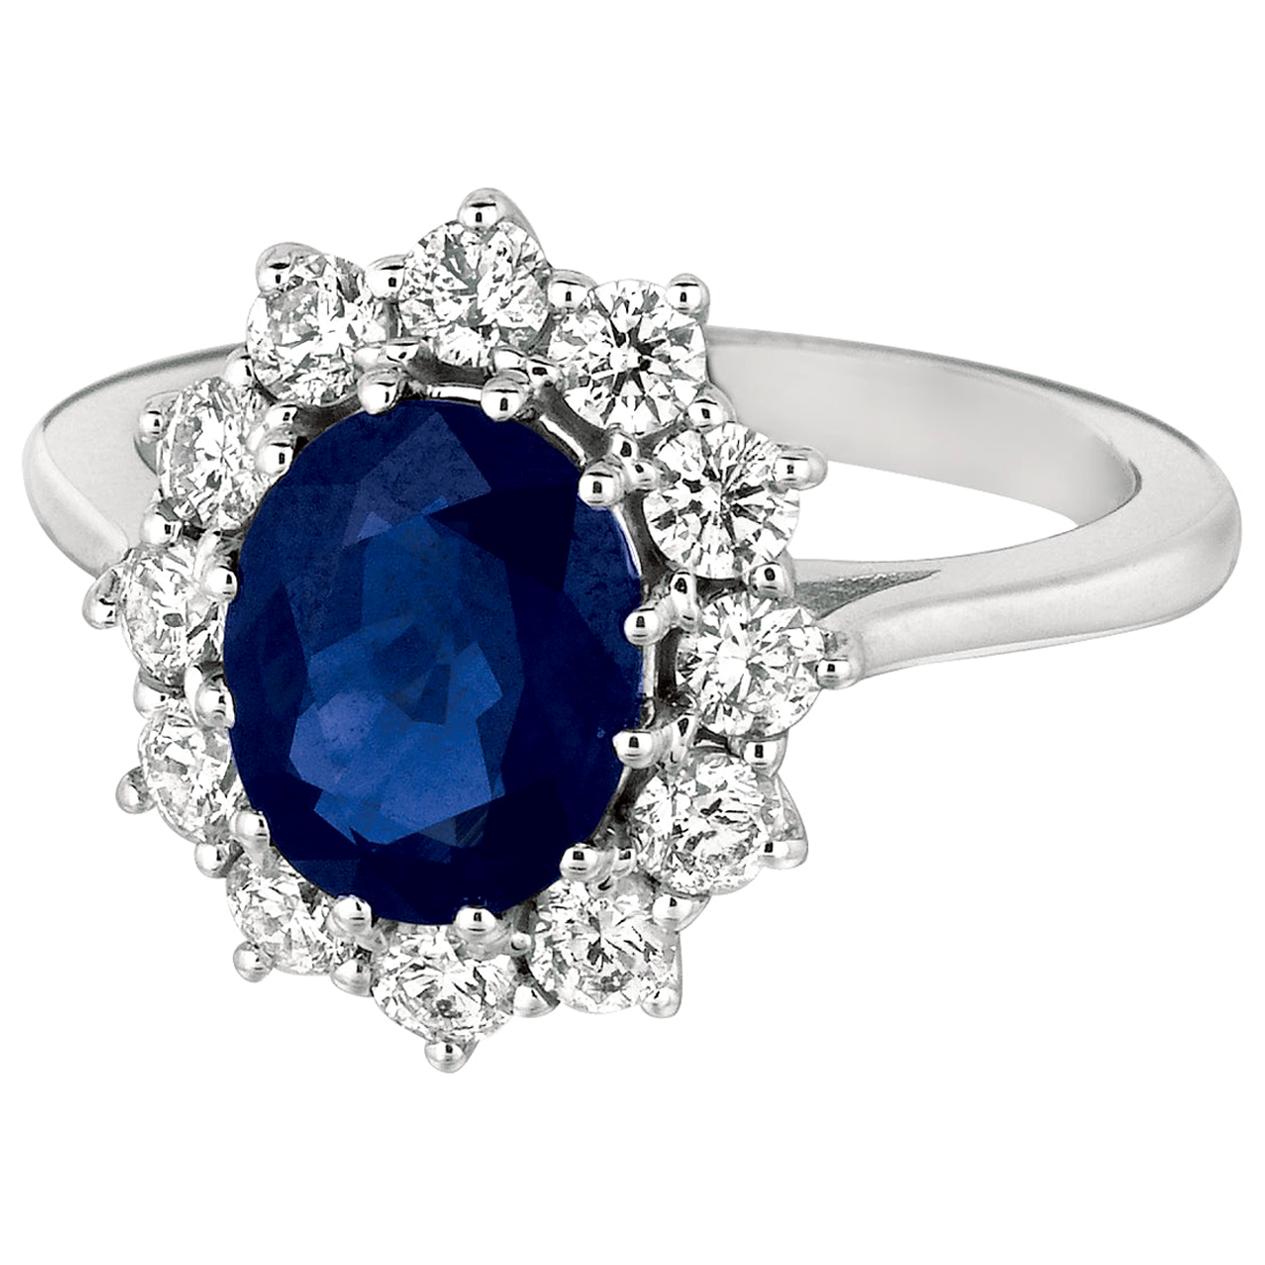 Princess Diana Inspired 3.55 Carat Oval Sapphire and Diamond Ring 14K White Gold For Sale